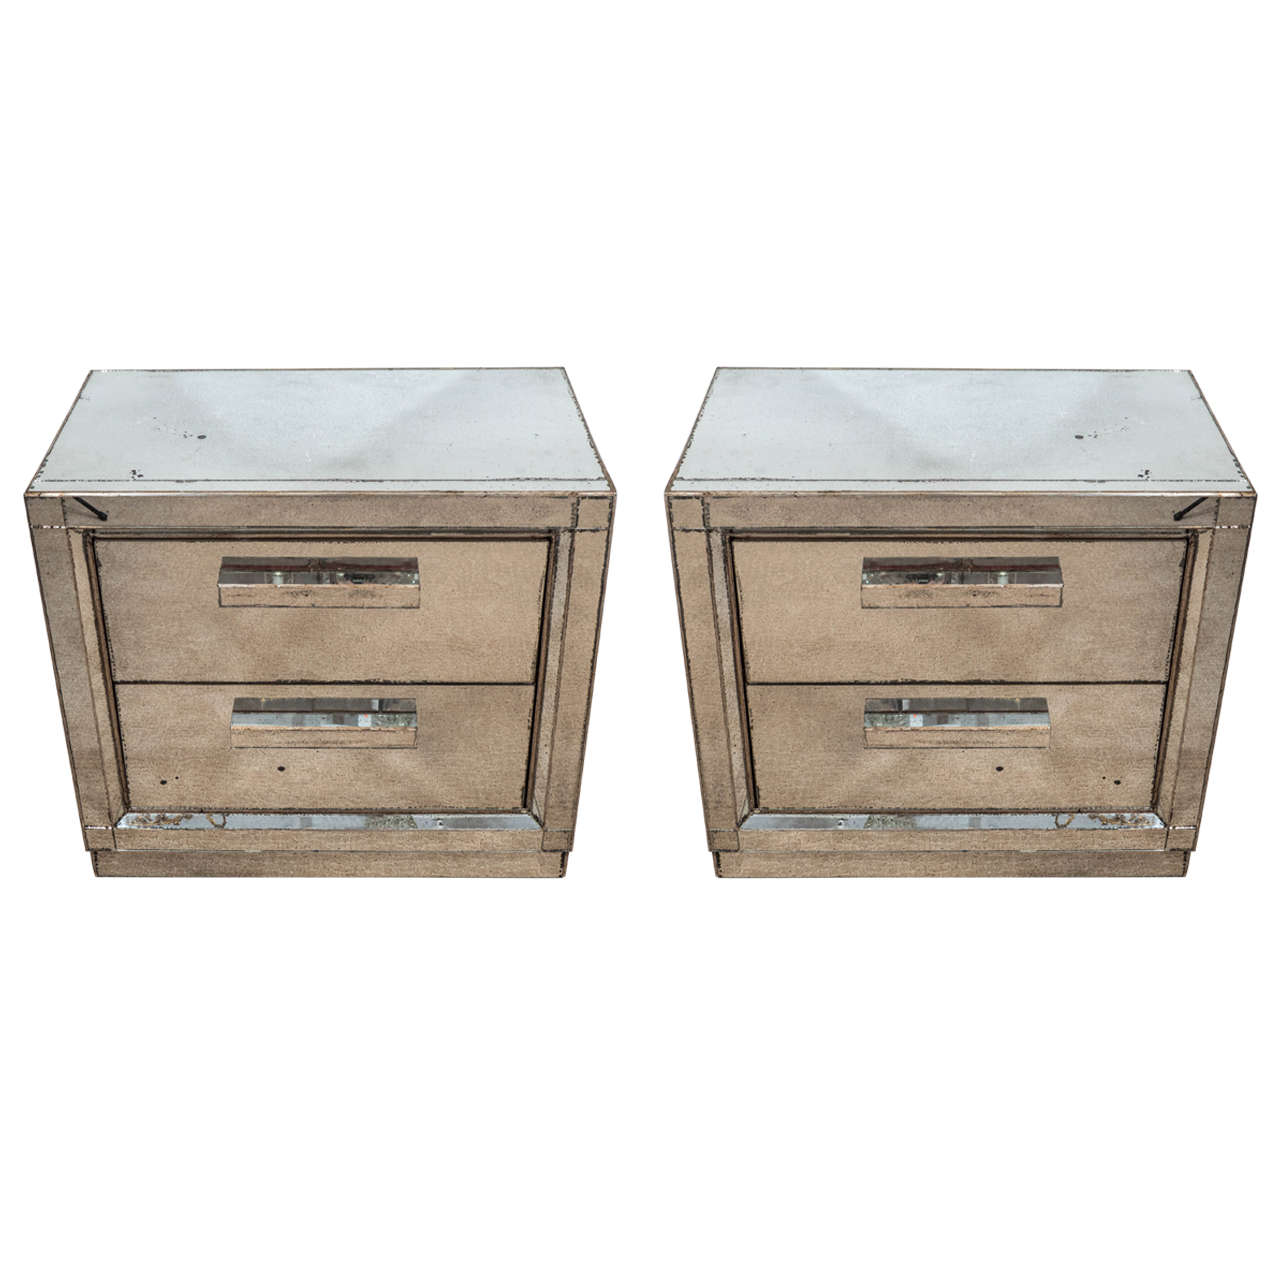 A Midcentury Pair of Antiqued Two-Drawer Mirrored Nightstands